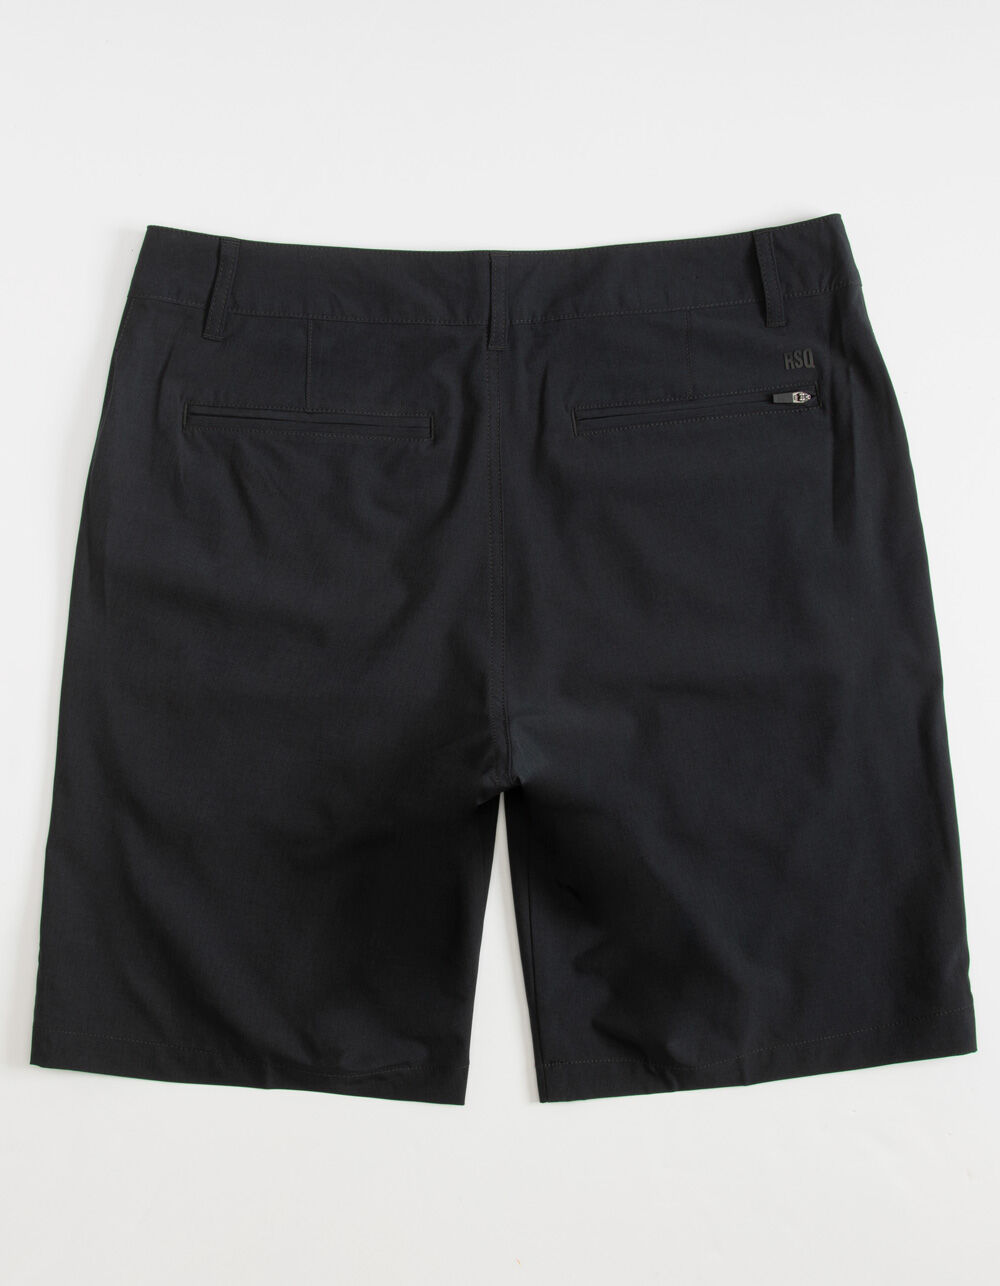 RSQ Mid Length Mens Charcoal Hybrid Shorts - CHARCOAL | Tillys